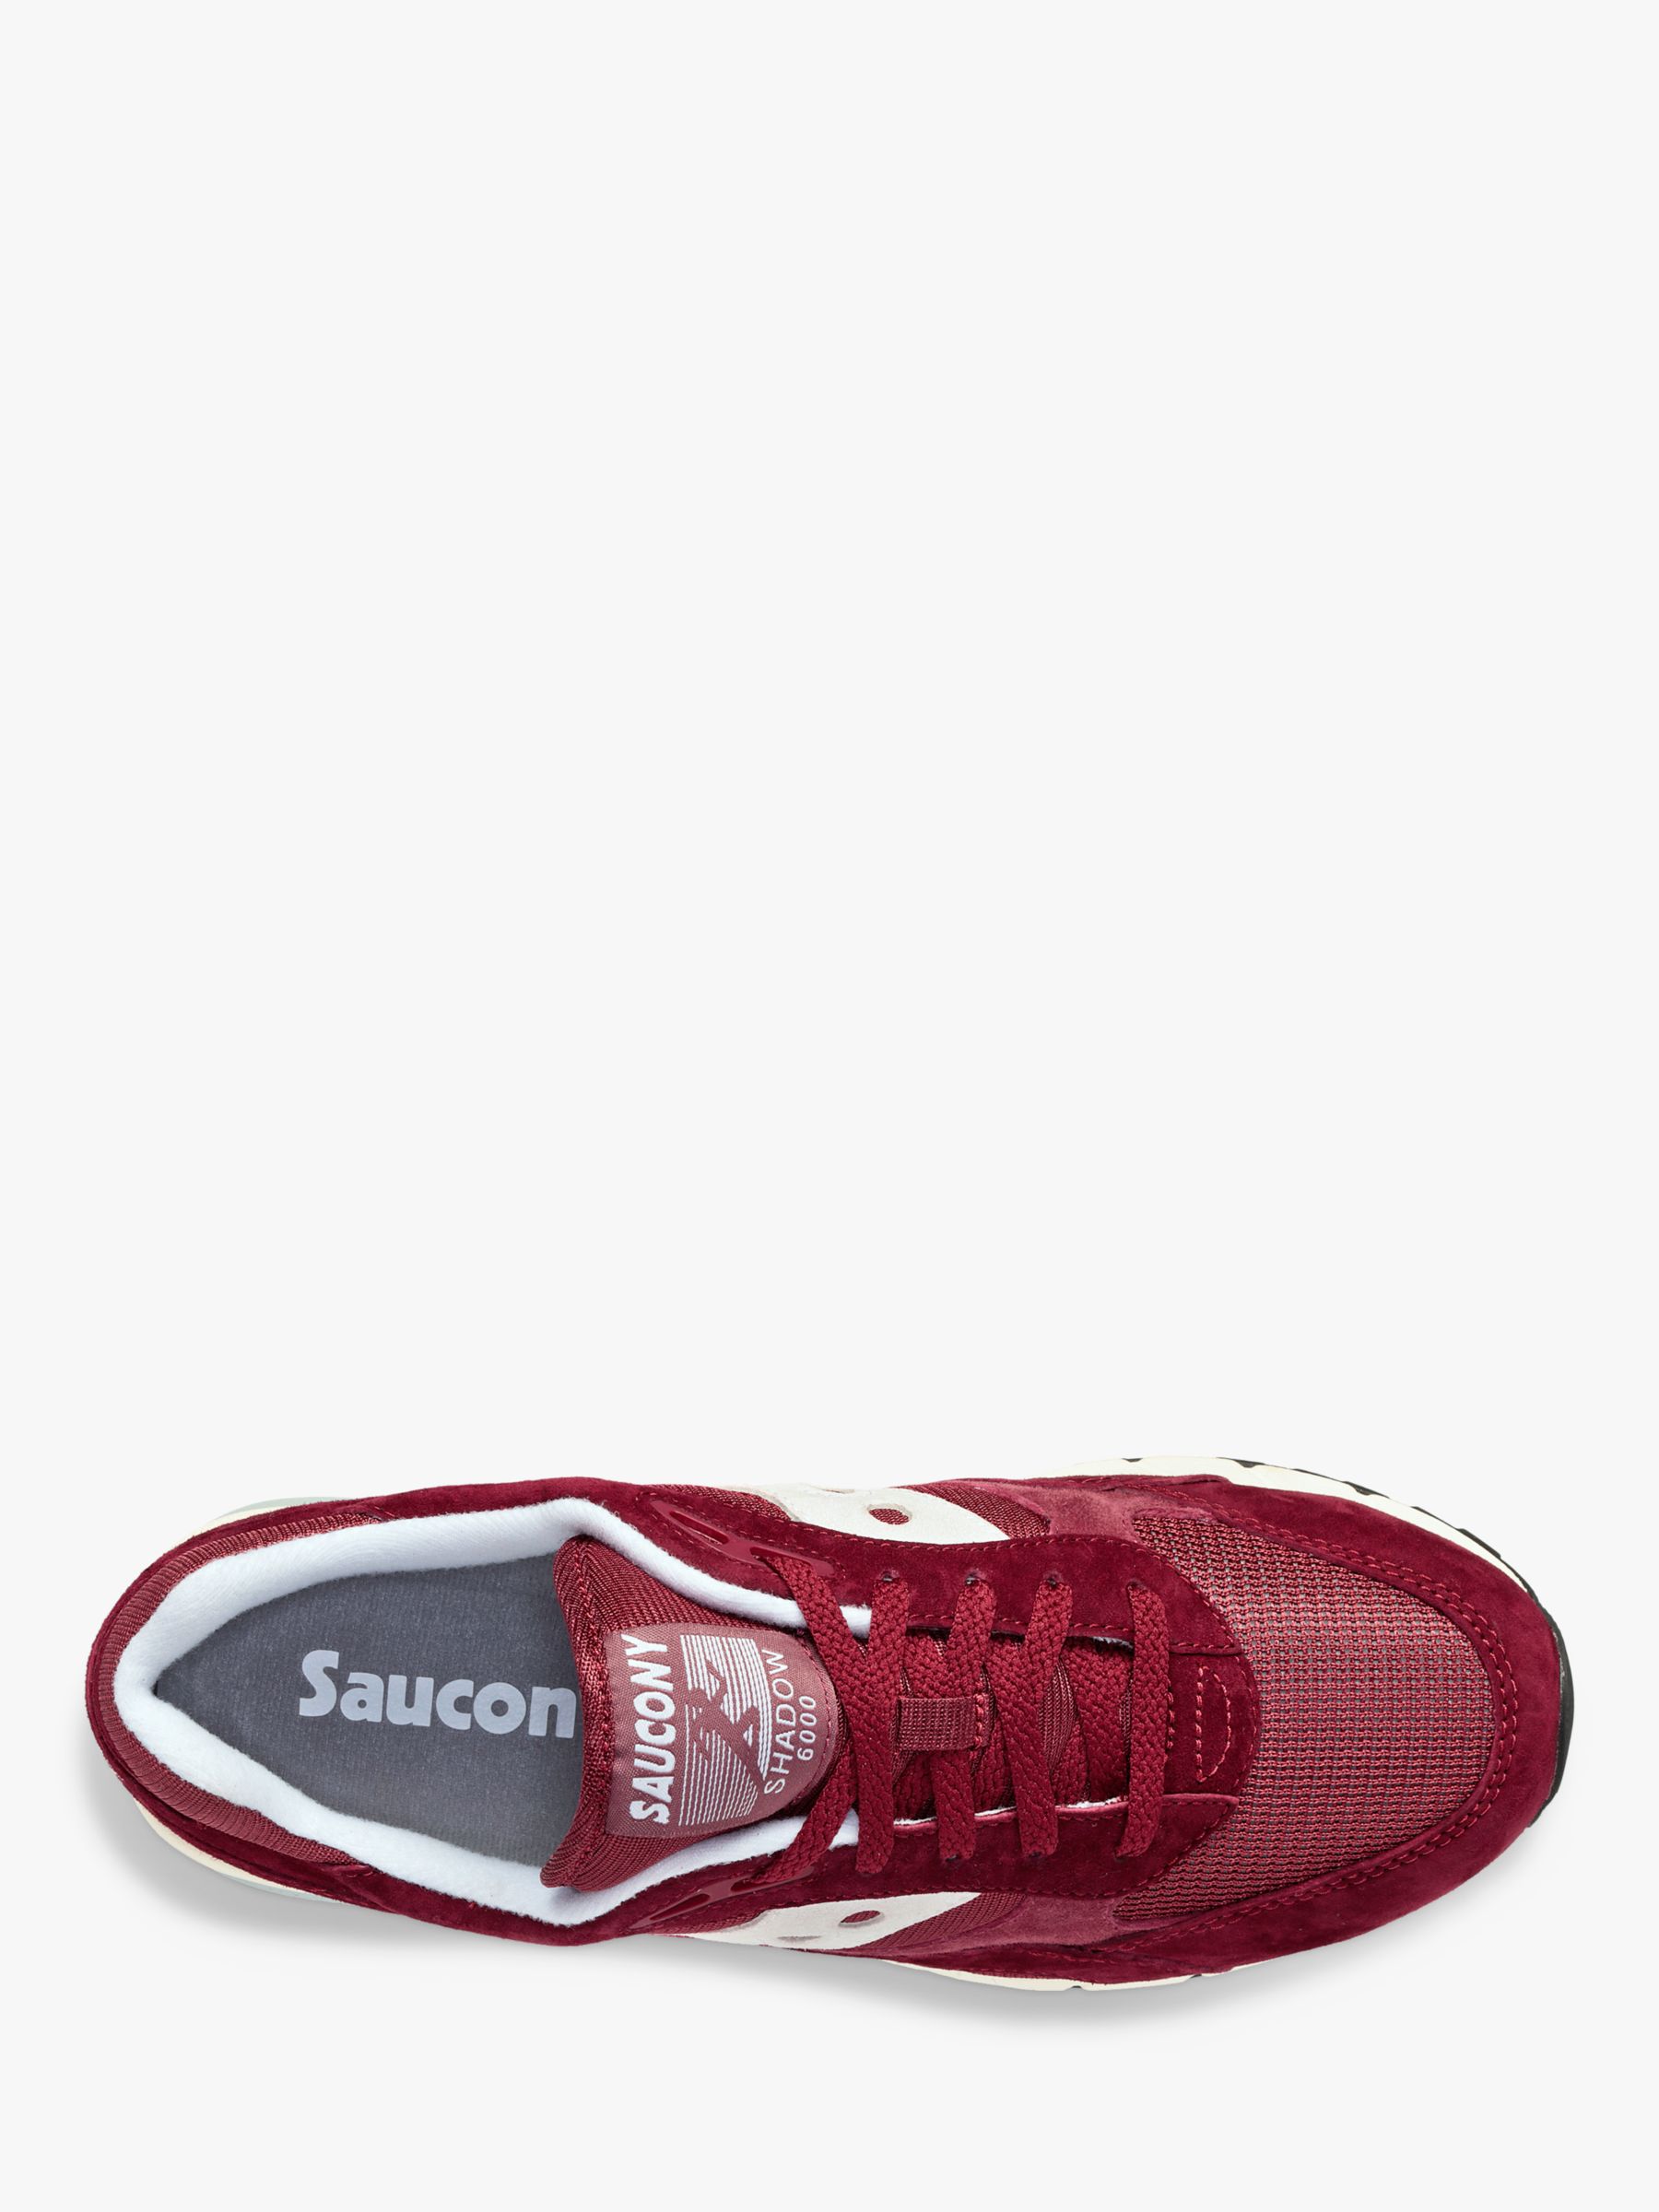 Saucony Shadow 6000 Lace Up Trainers, Burgundy at John Lewis & Partners